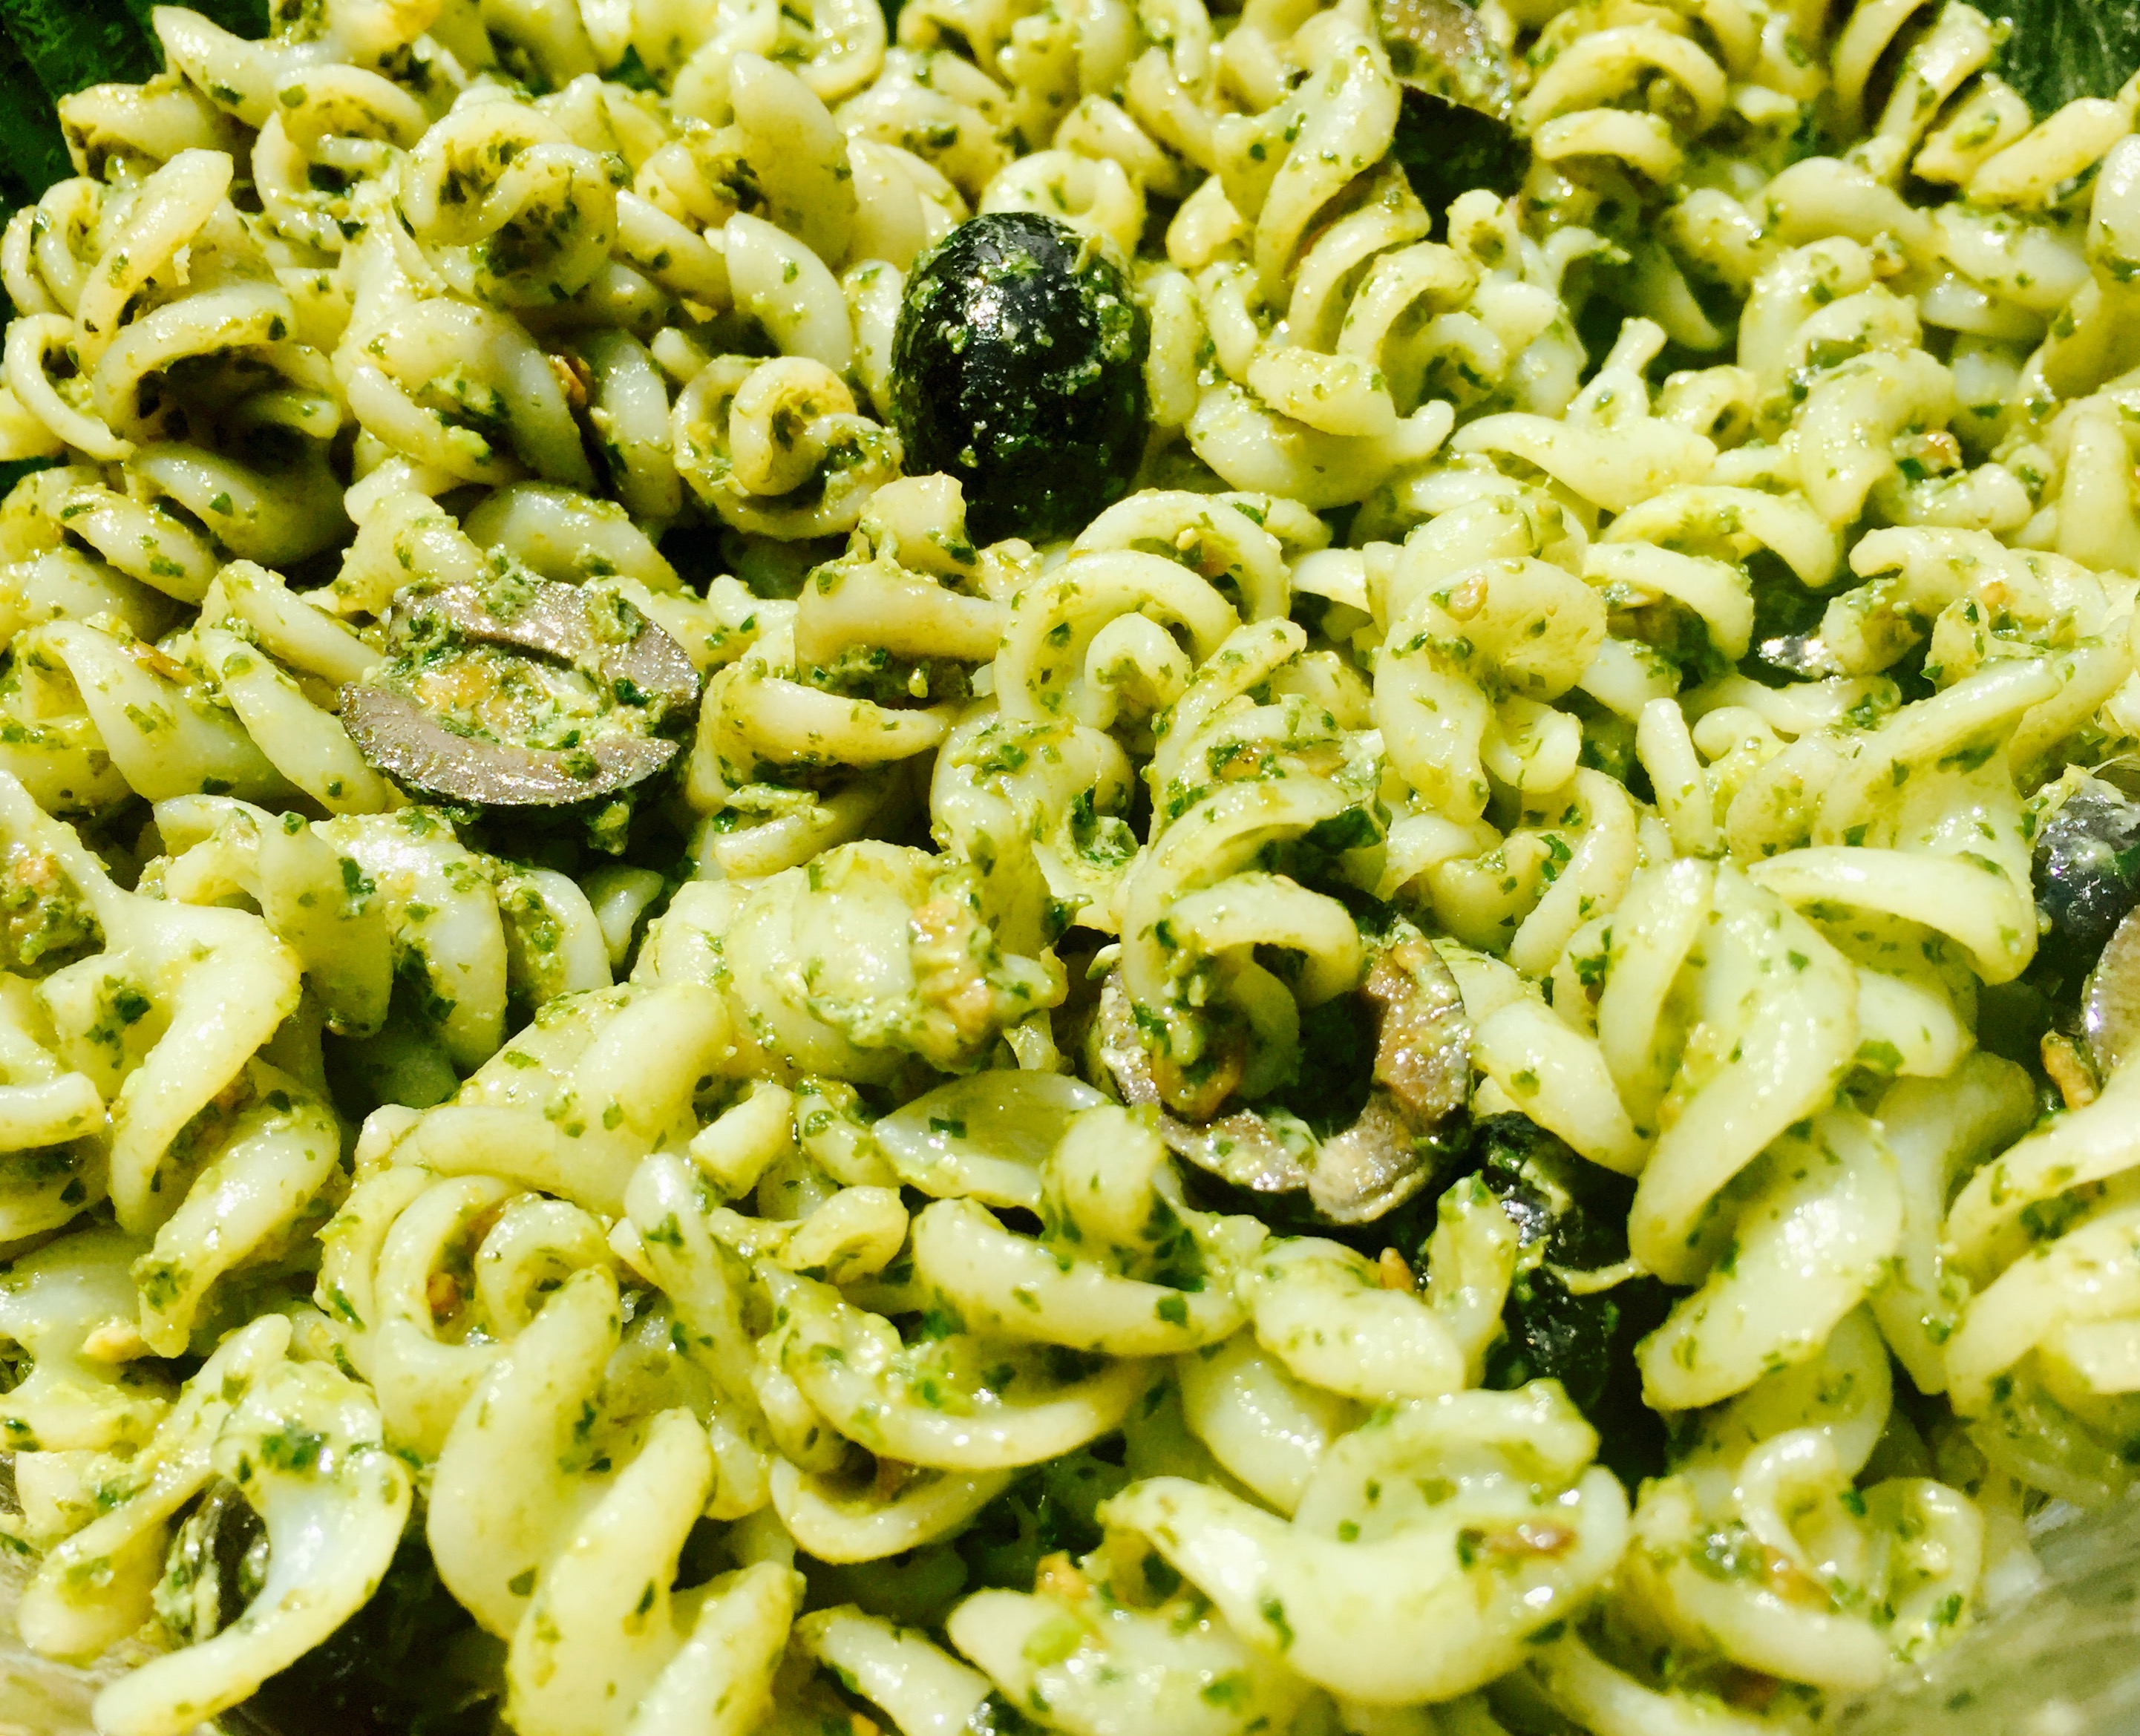 My dairy free, gluten free pesto pasta salad recipe with black olives is a delicious addition to any summer feast